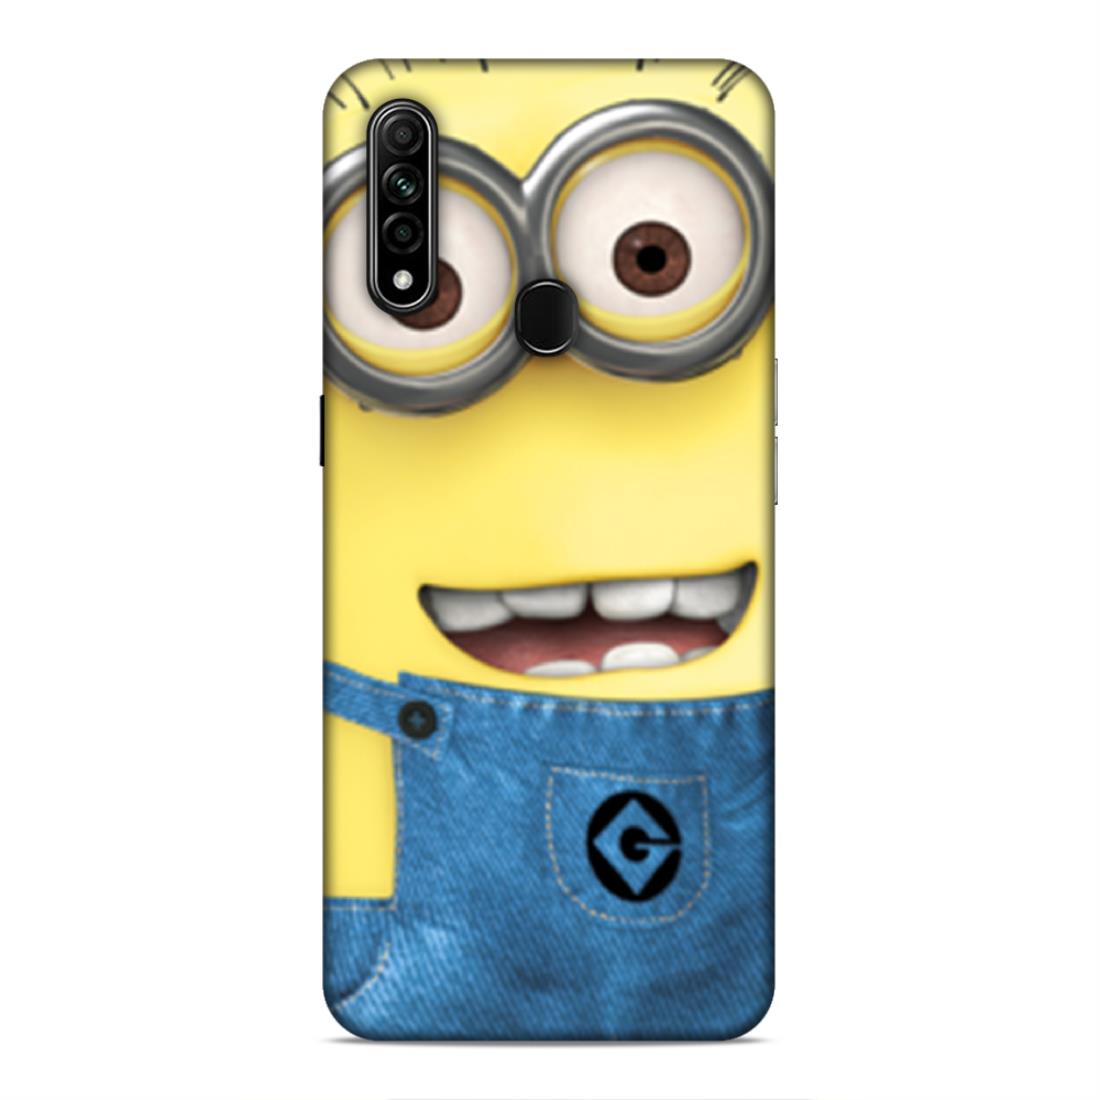 Minions Hard Back Case For Oppo A31 2020